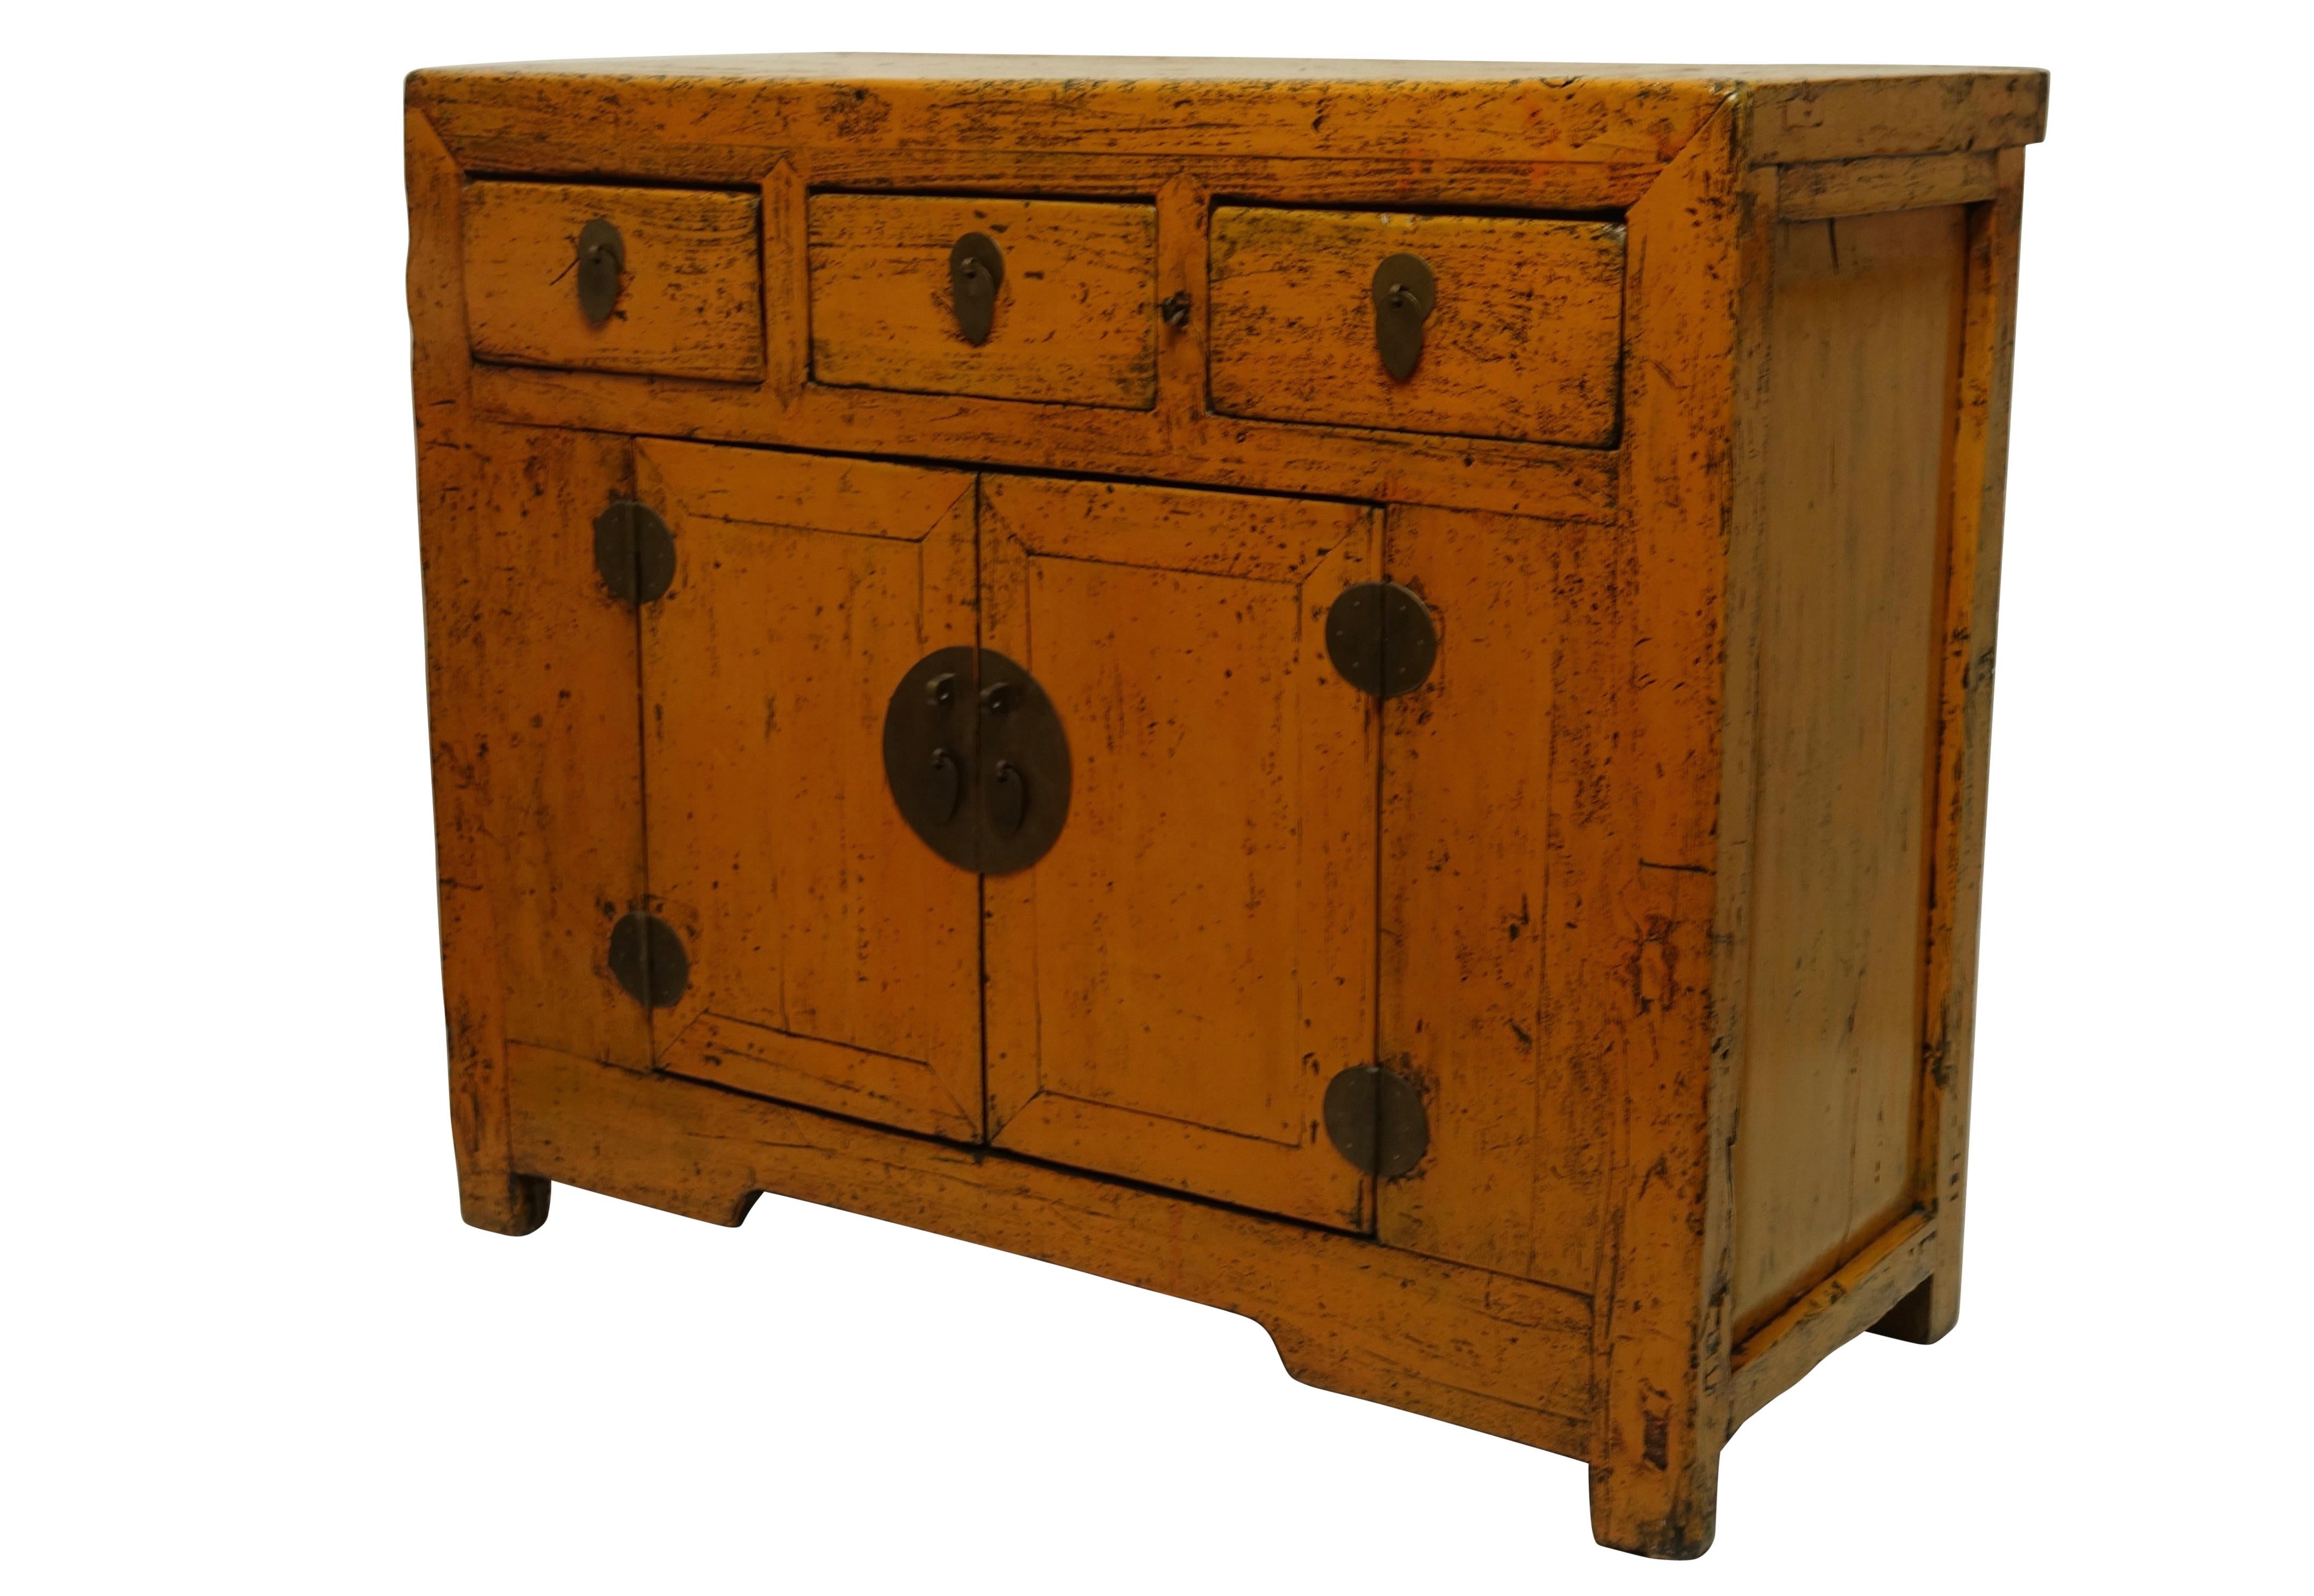 Painted Chinese Cabinet, 19th Century (Holz)